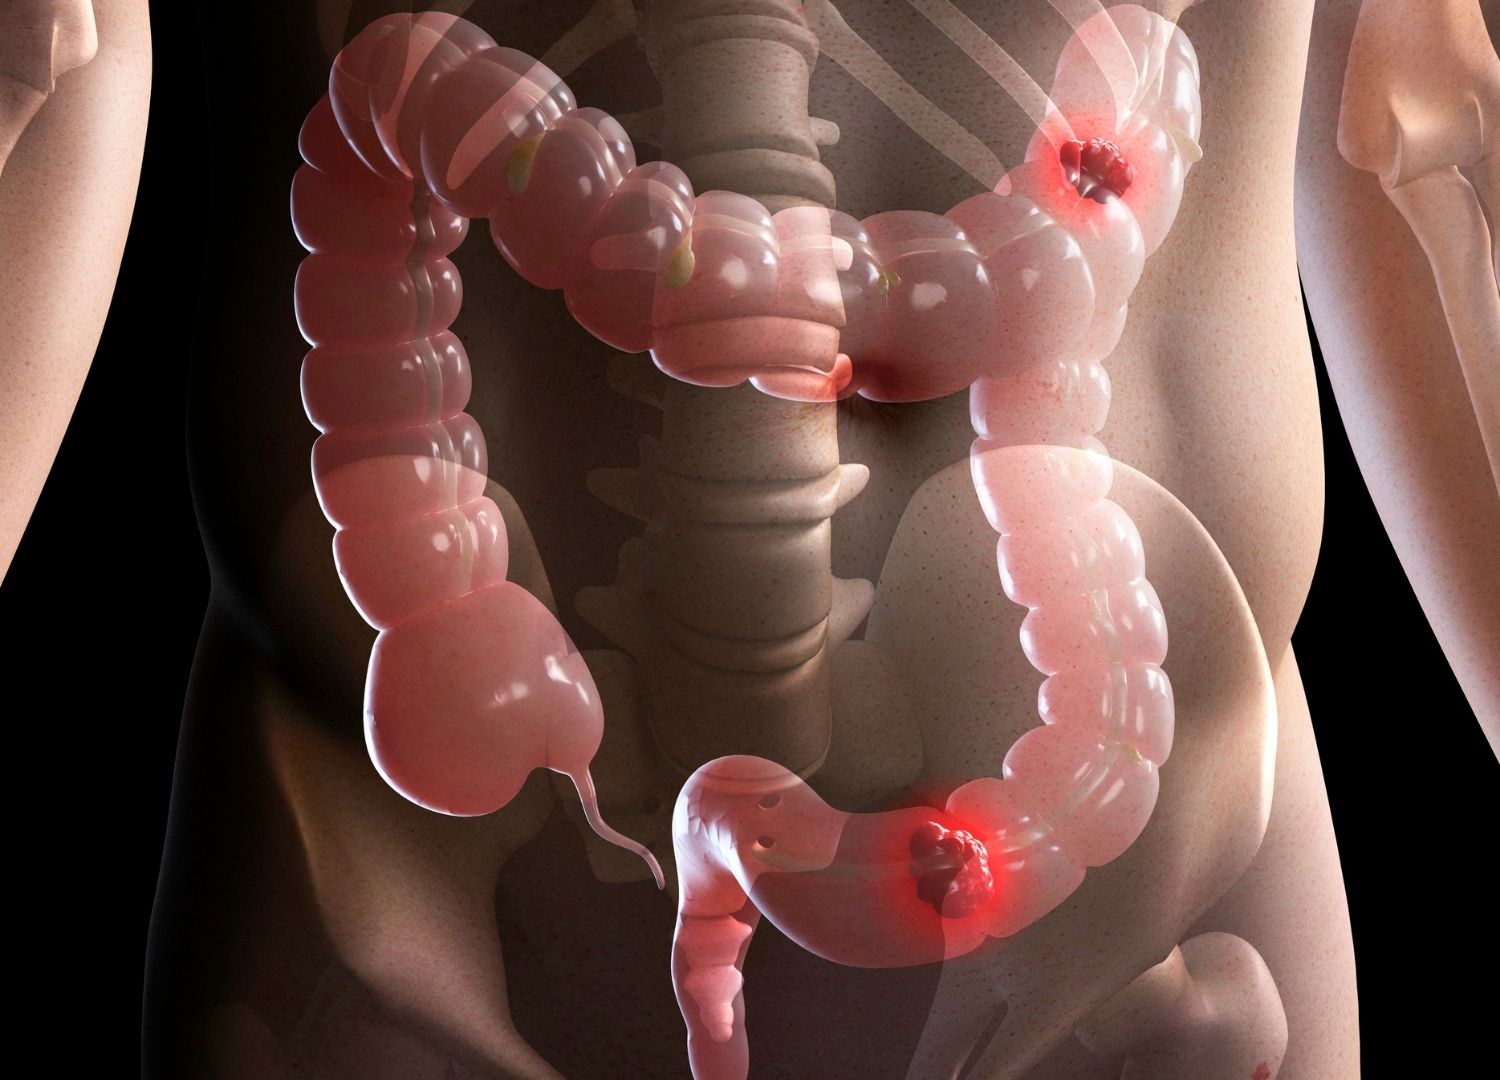 "What you should know about colon  cancer"